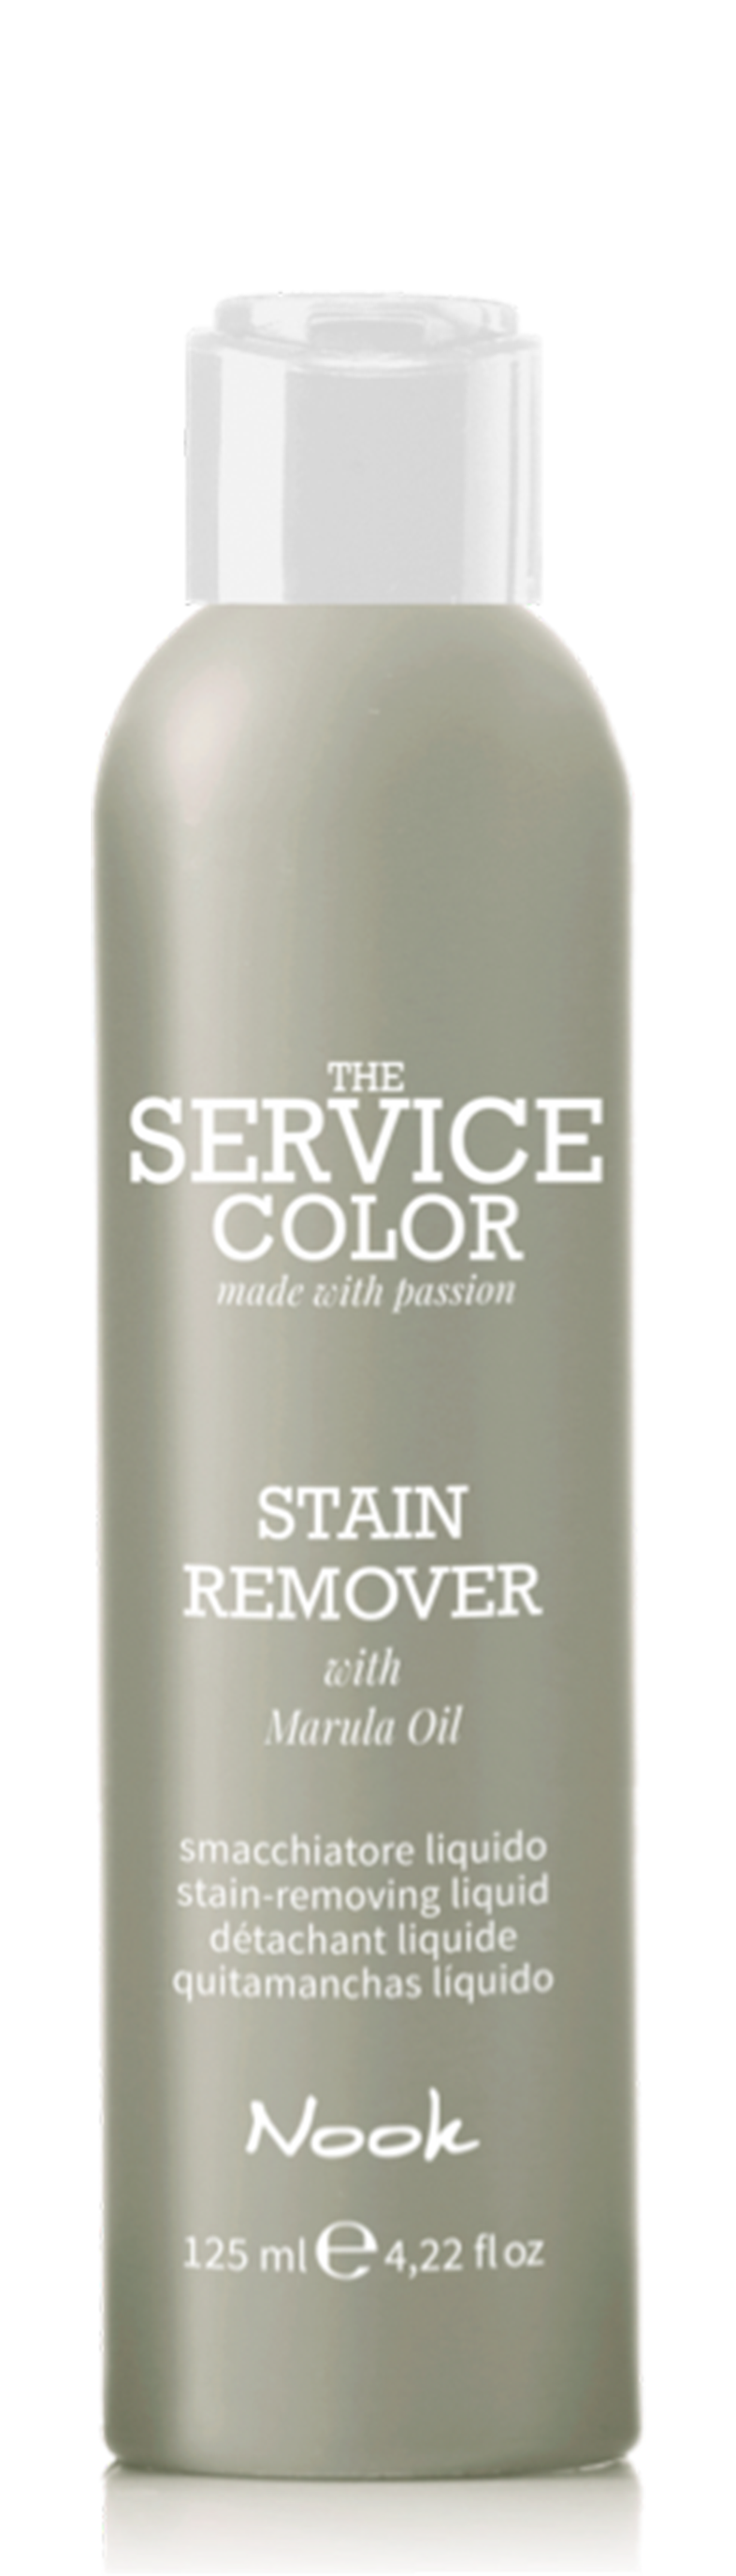 125 stain remover